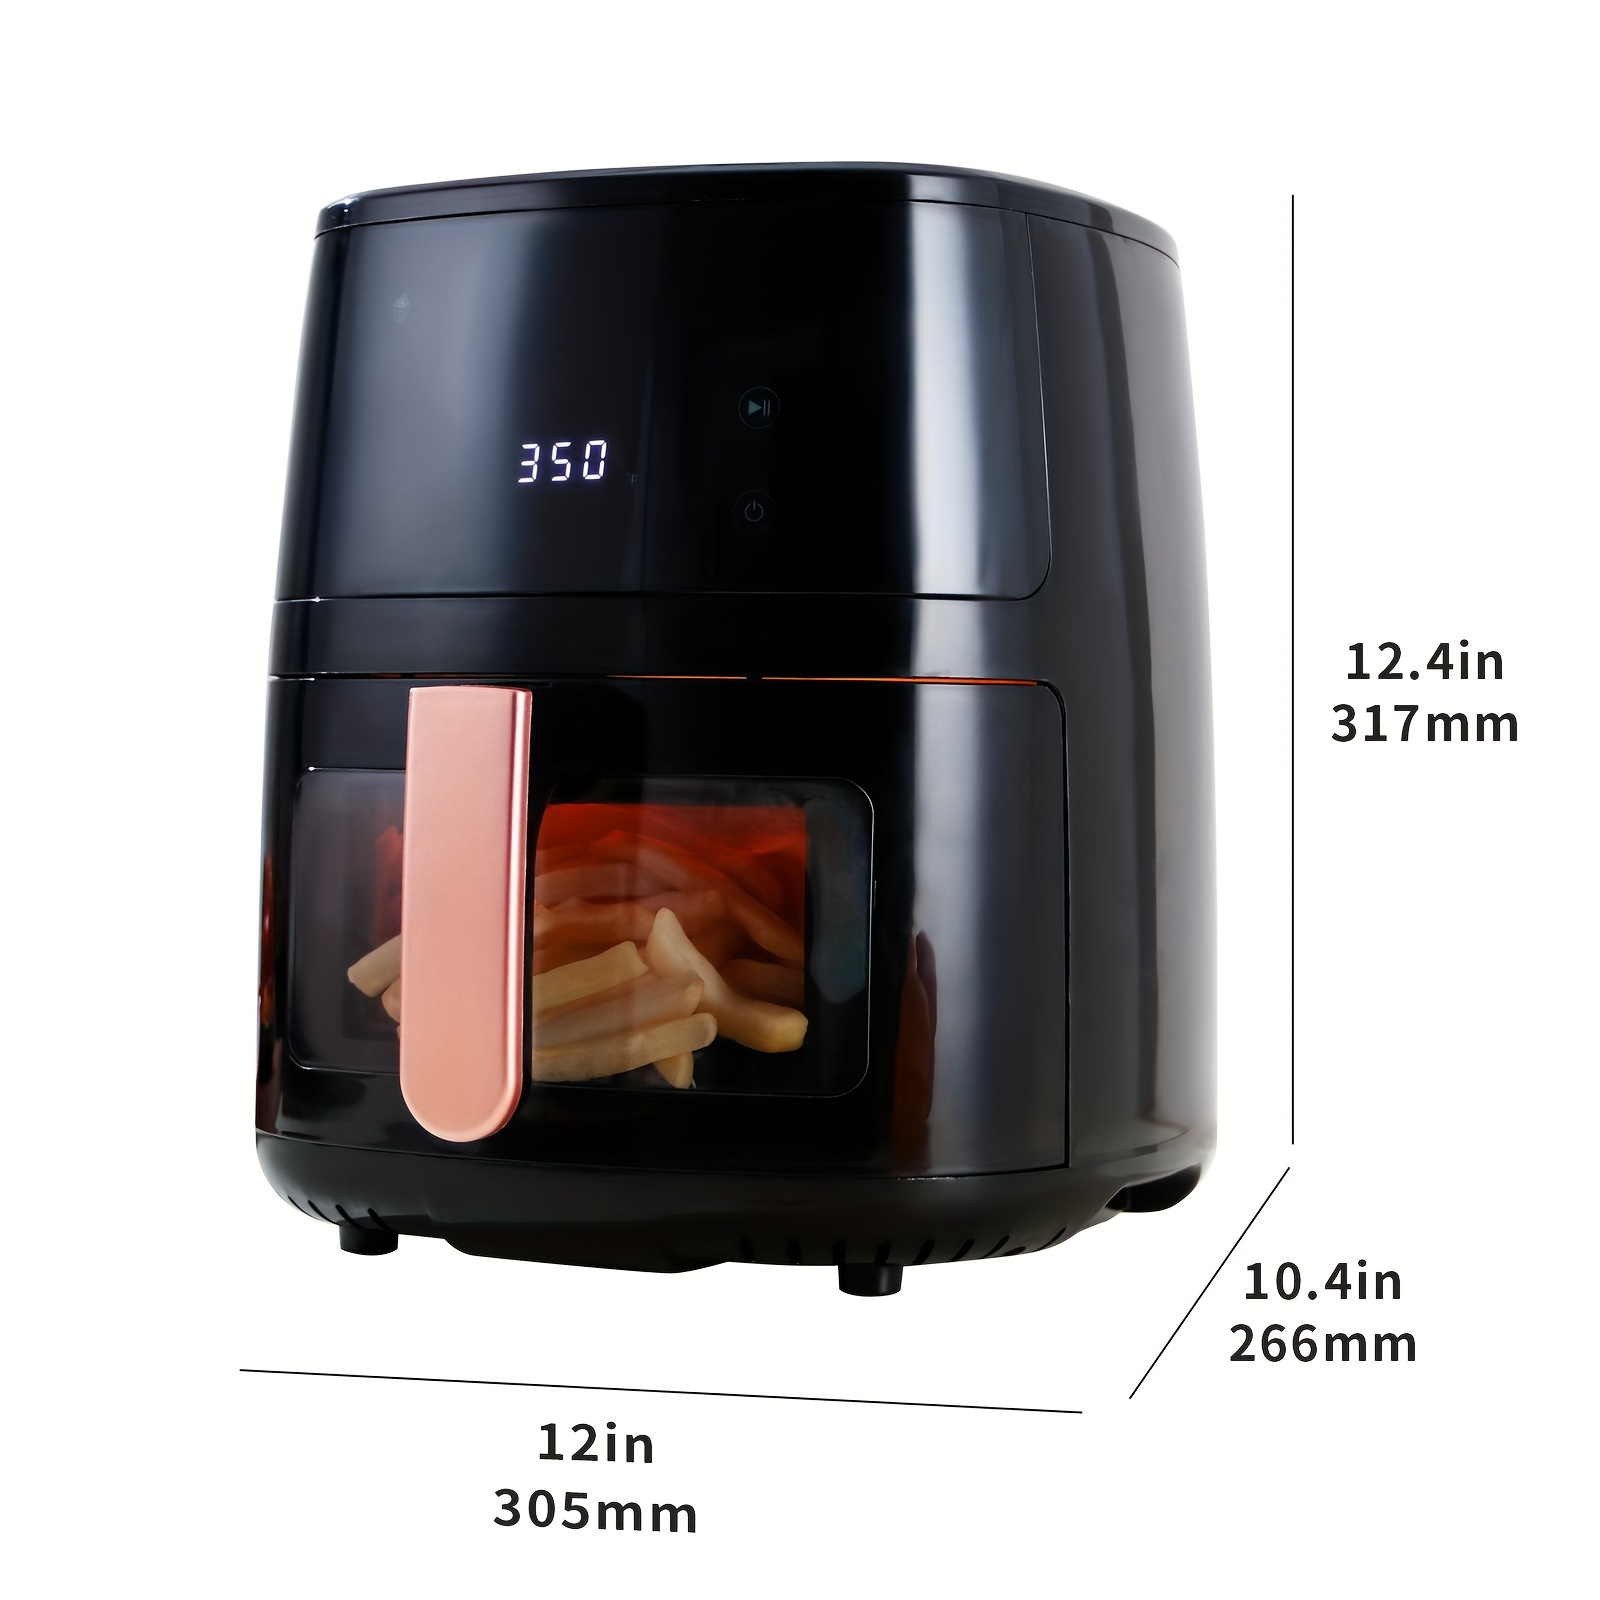 IWholesale Air Fryer, Spadger 3L Small Air Fryer, 5-in-I Less Oil Airfryer,  1400W Air Fryer Oven Pizza Cooker, Non-Stick Fry Basket, Over Heat  Protection, Timer+Temperature Control Air Fryers Manufacturer and Pricelist